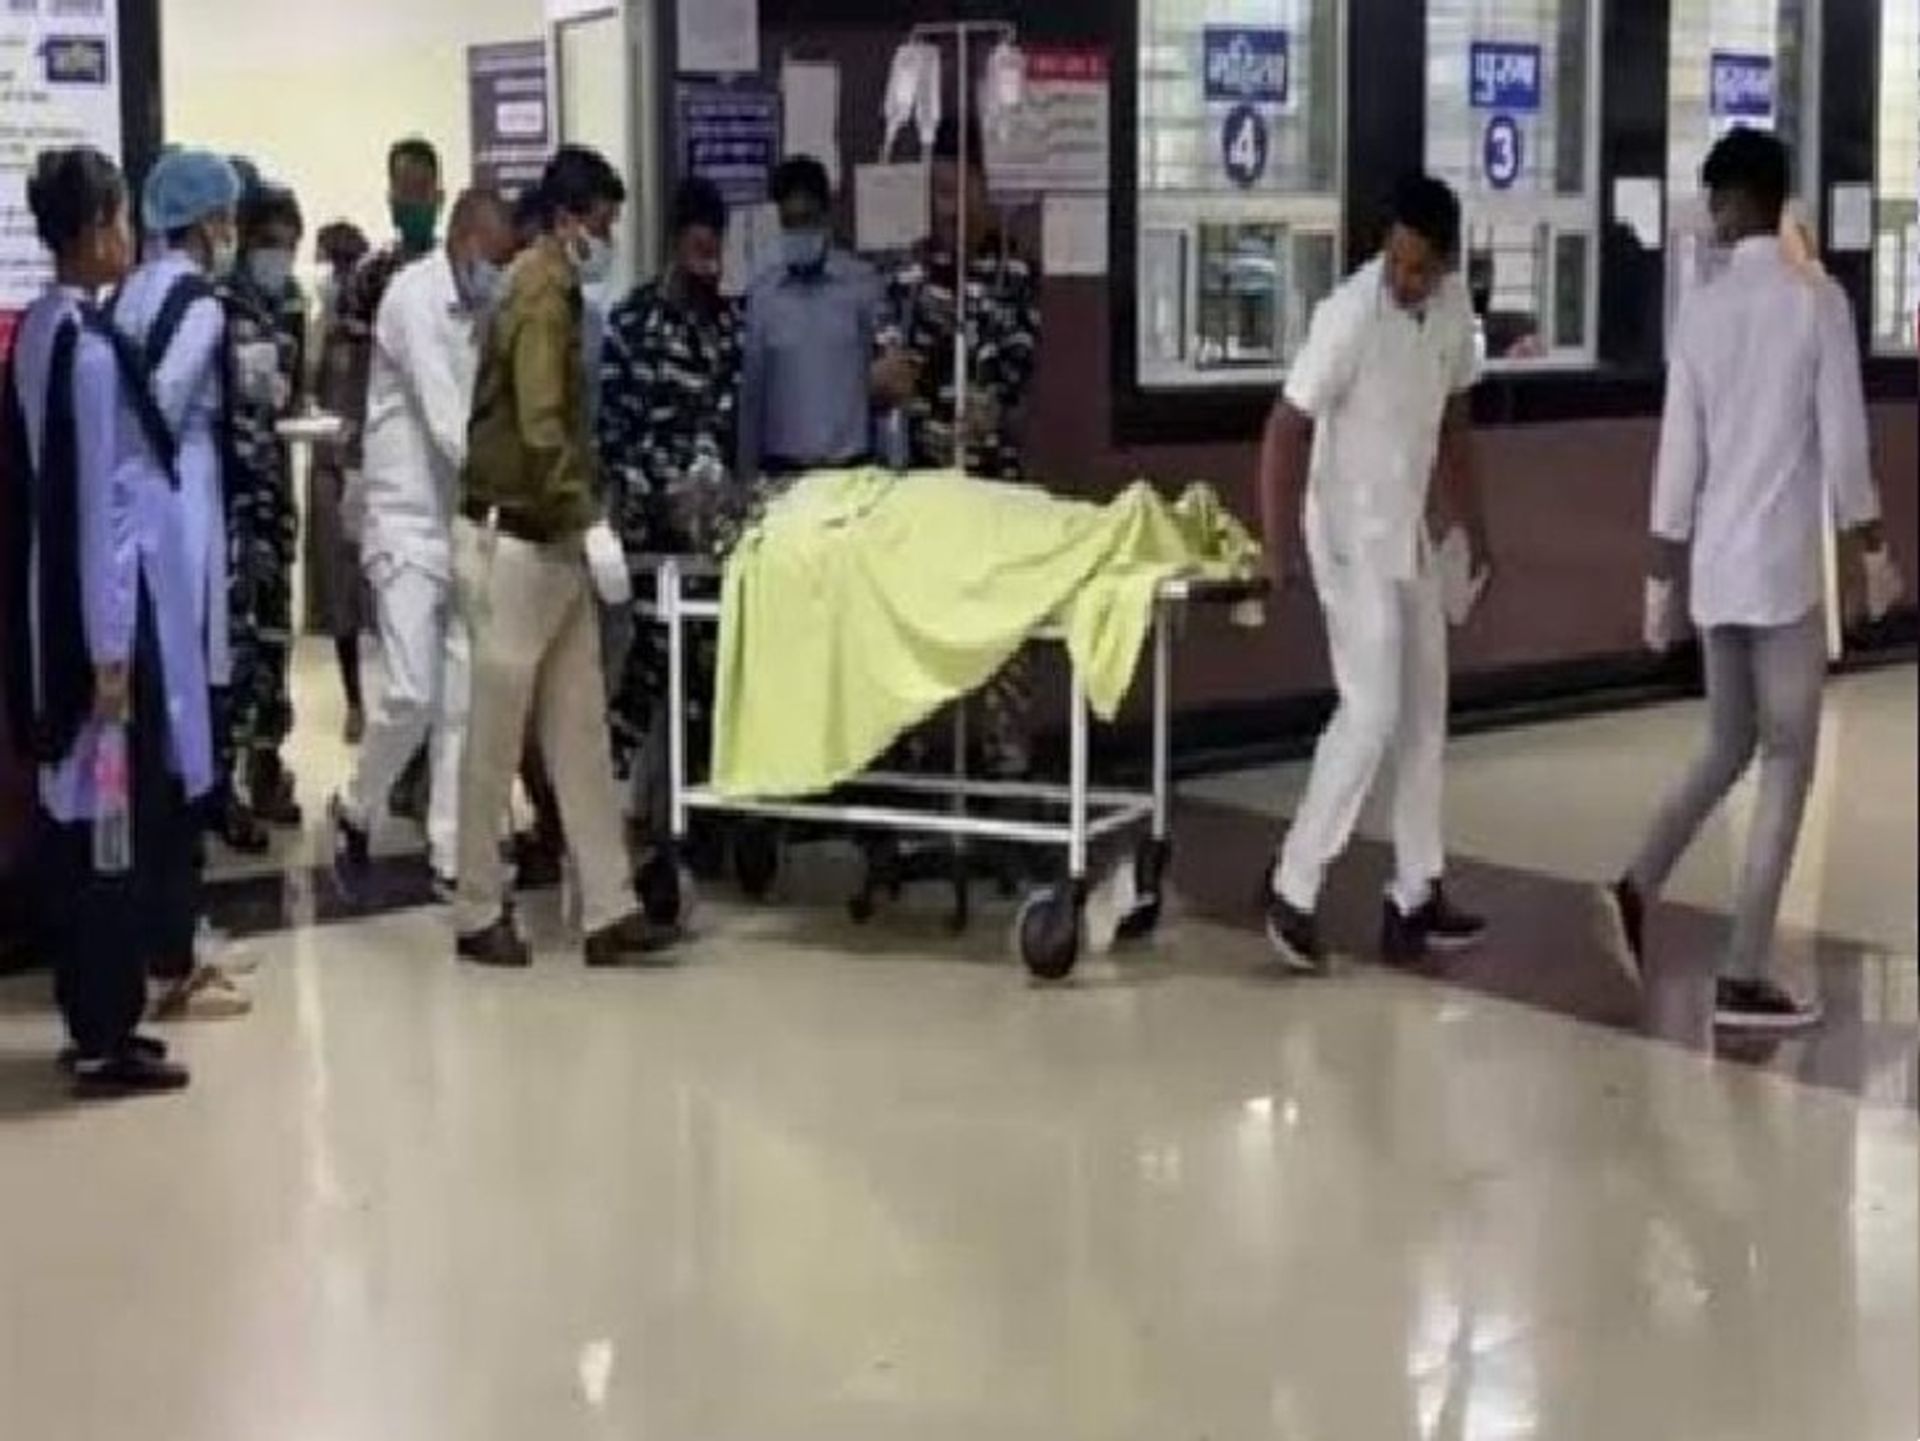 A CRPF jawan tried to shoot himself with his service weapon in Gaya, Bihar today (November 4, 2022).